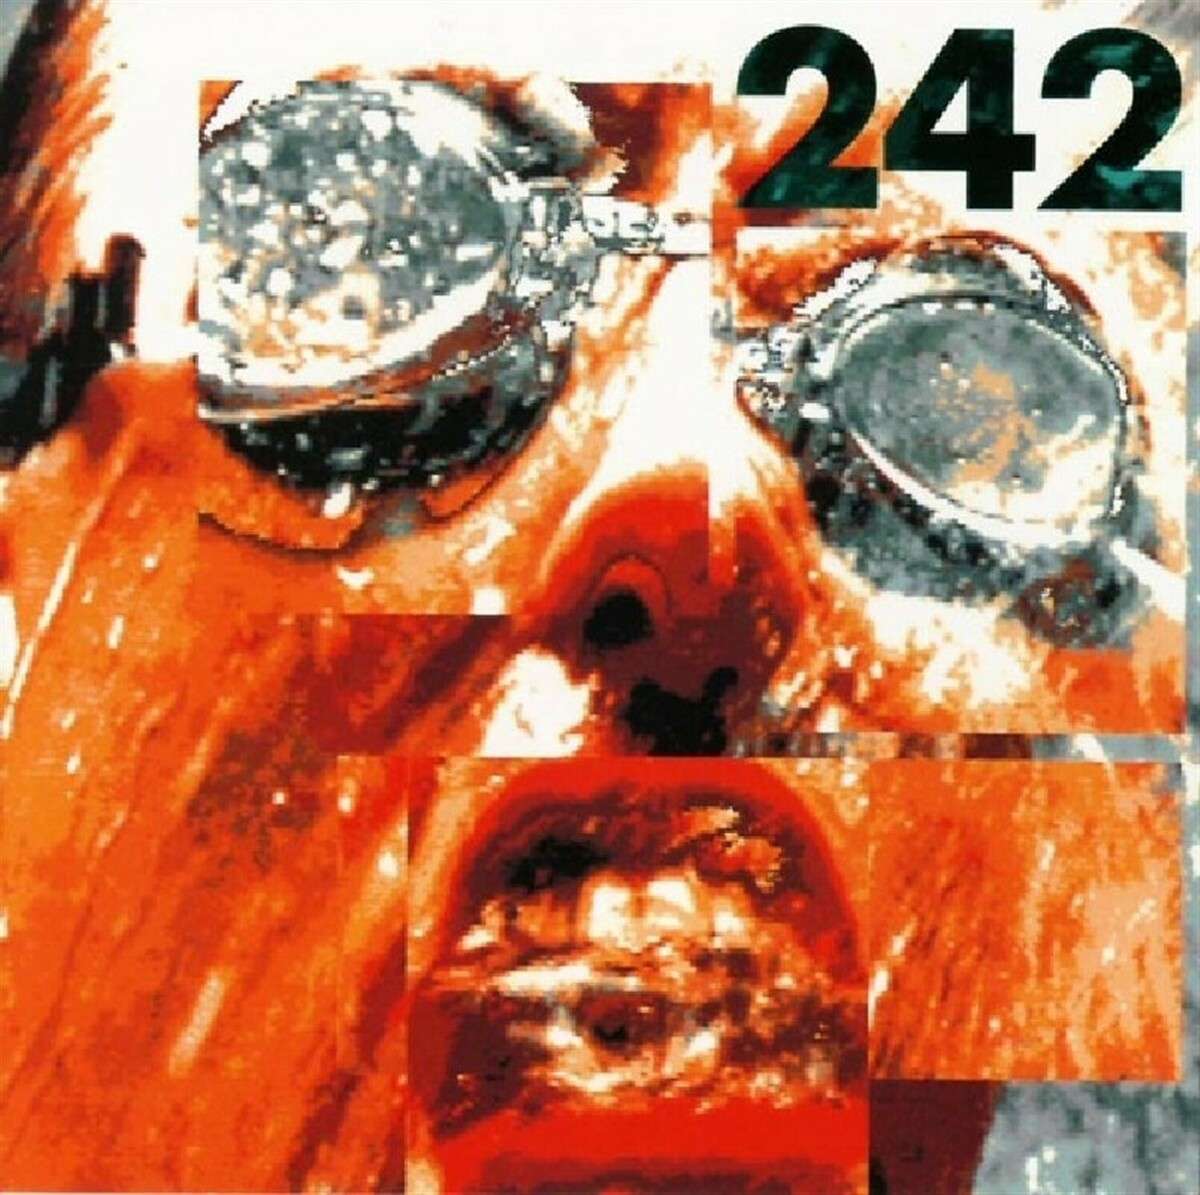 Front 242 - Tyranny >for You< - 33RPM